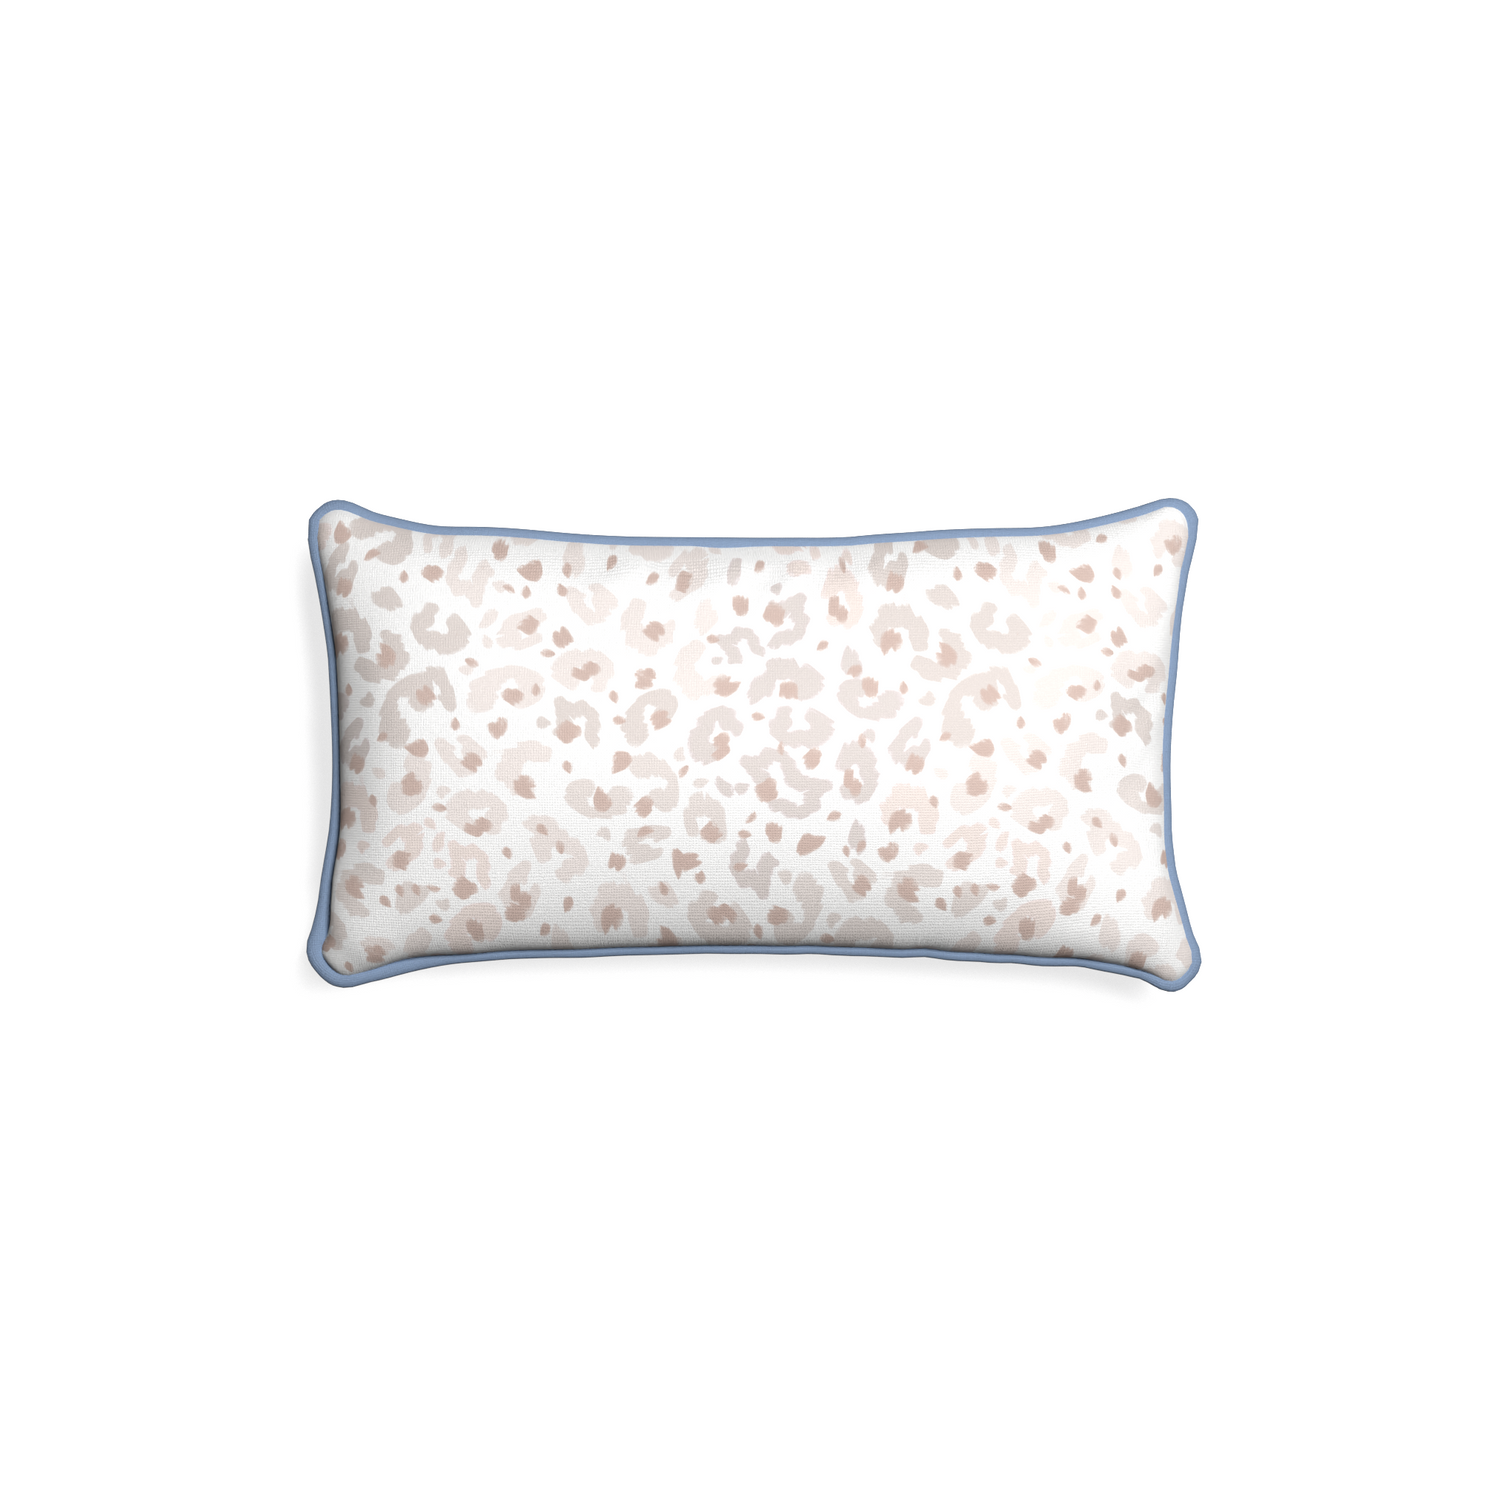 Petite-lumbar rosie custom beige animal printpillow with sky piping on white background